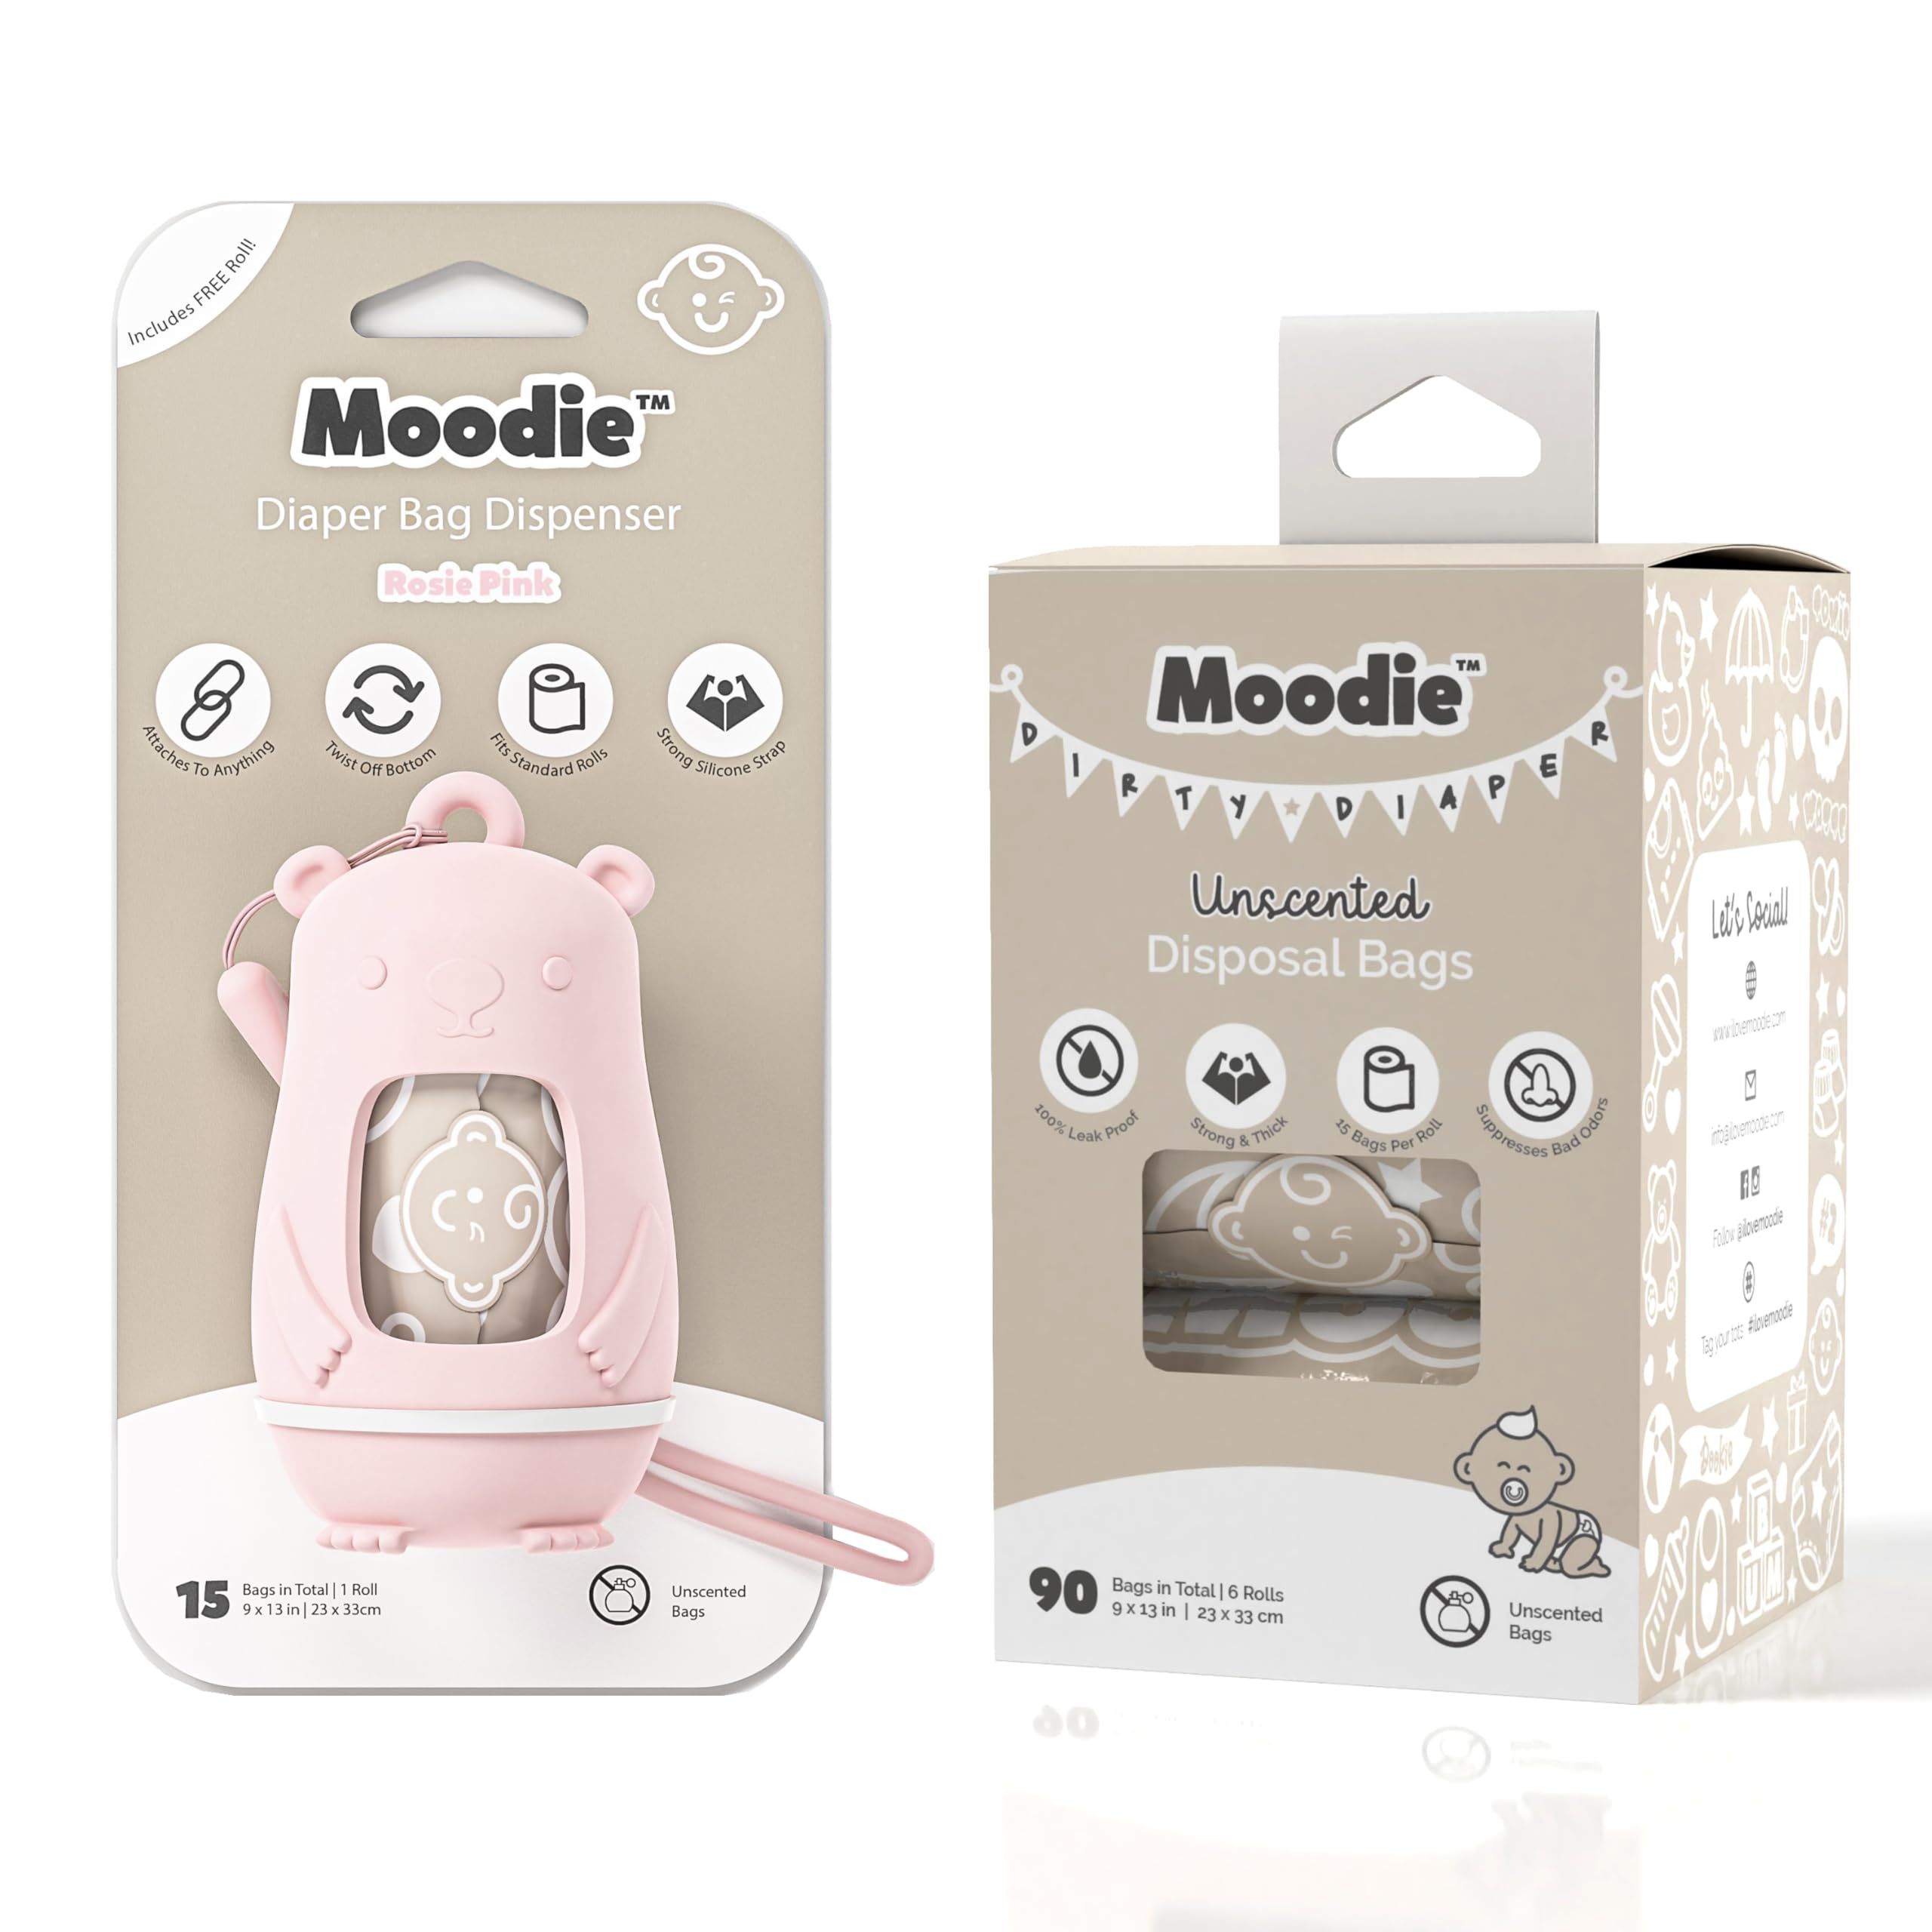 Moodie Teddy Bear Diaper Bag Dispenser w/Silicon Strap (ROSIE PINK) & 6 Refill Roll PACK (UNSCENTED - 105 Bags TOTAL) | Diaper Bag Essential Items